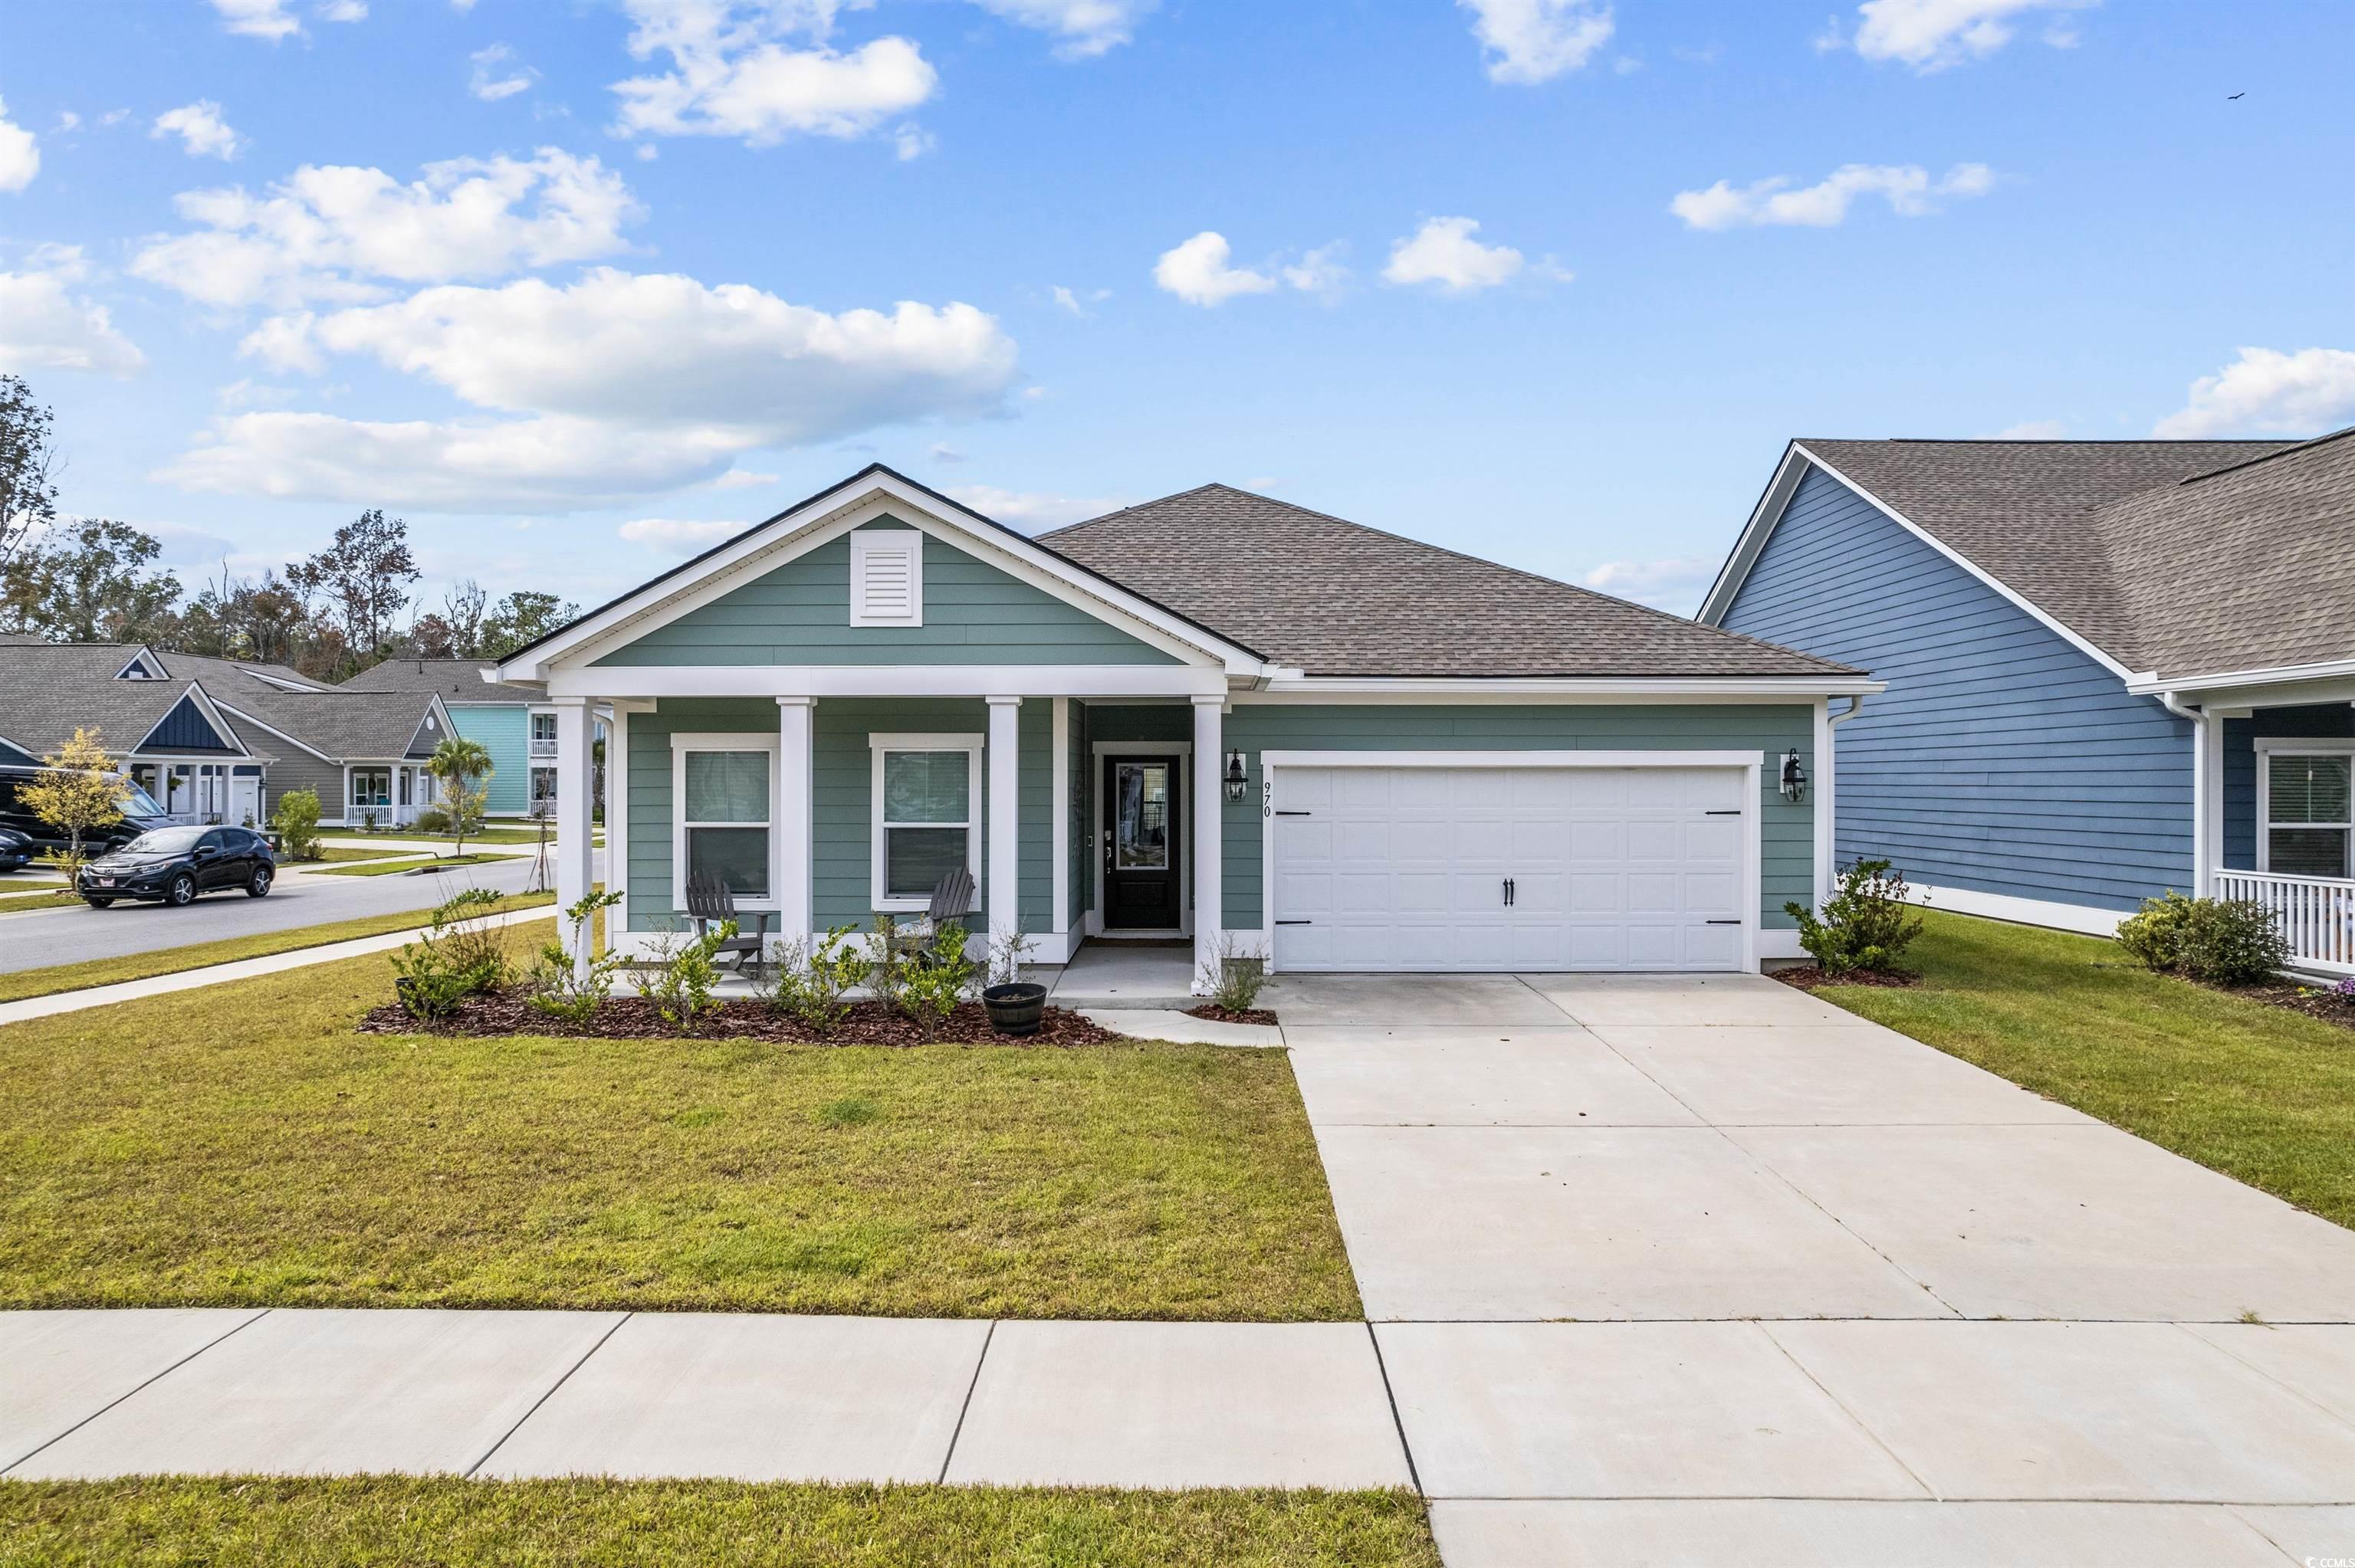 970 Mourning Dove Dr. Myrtle Beach, SC 29577